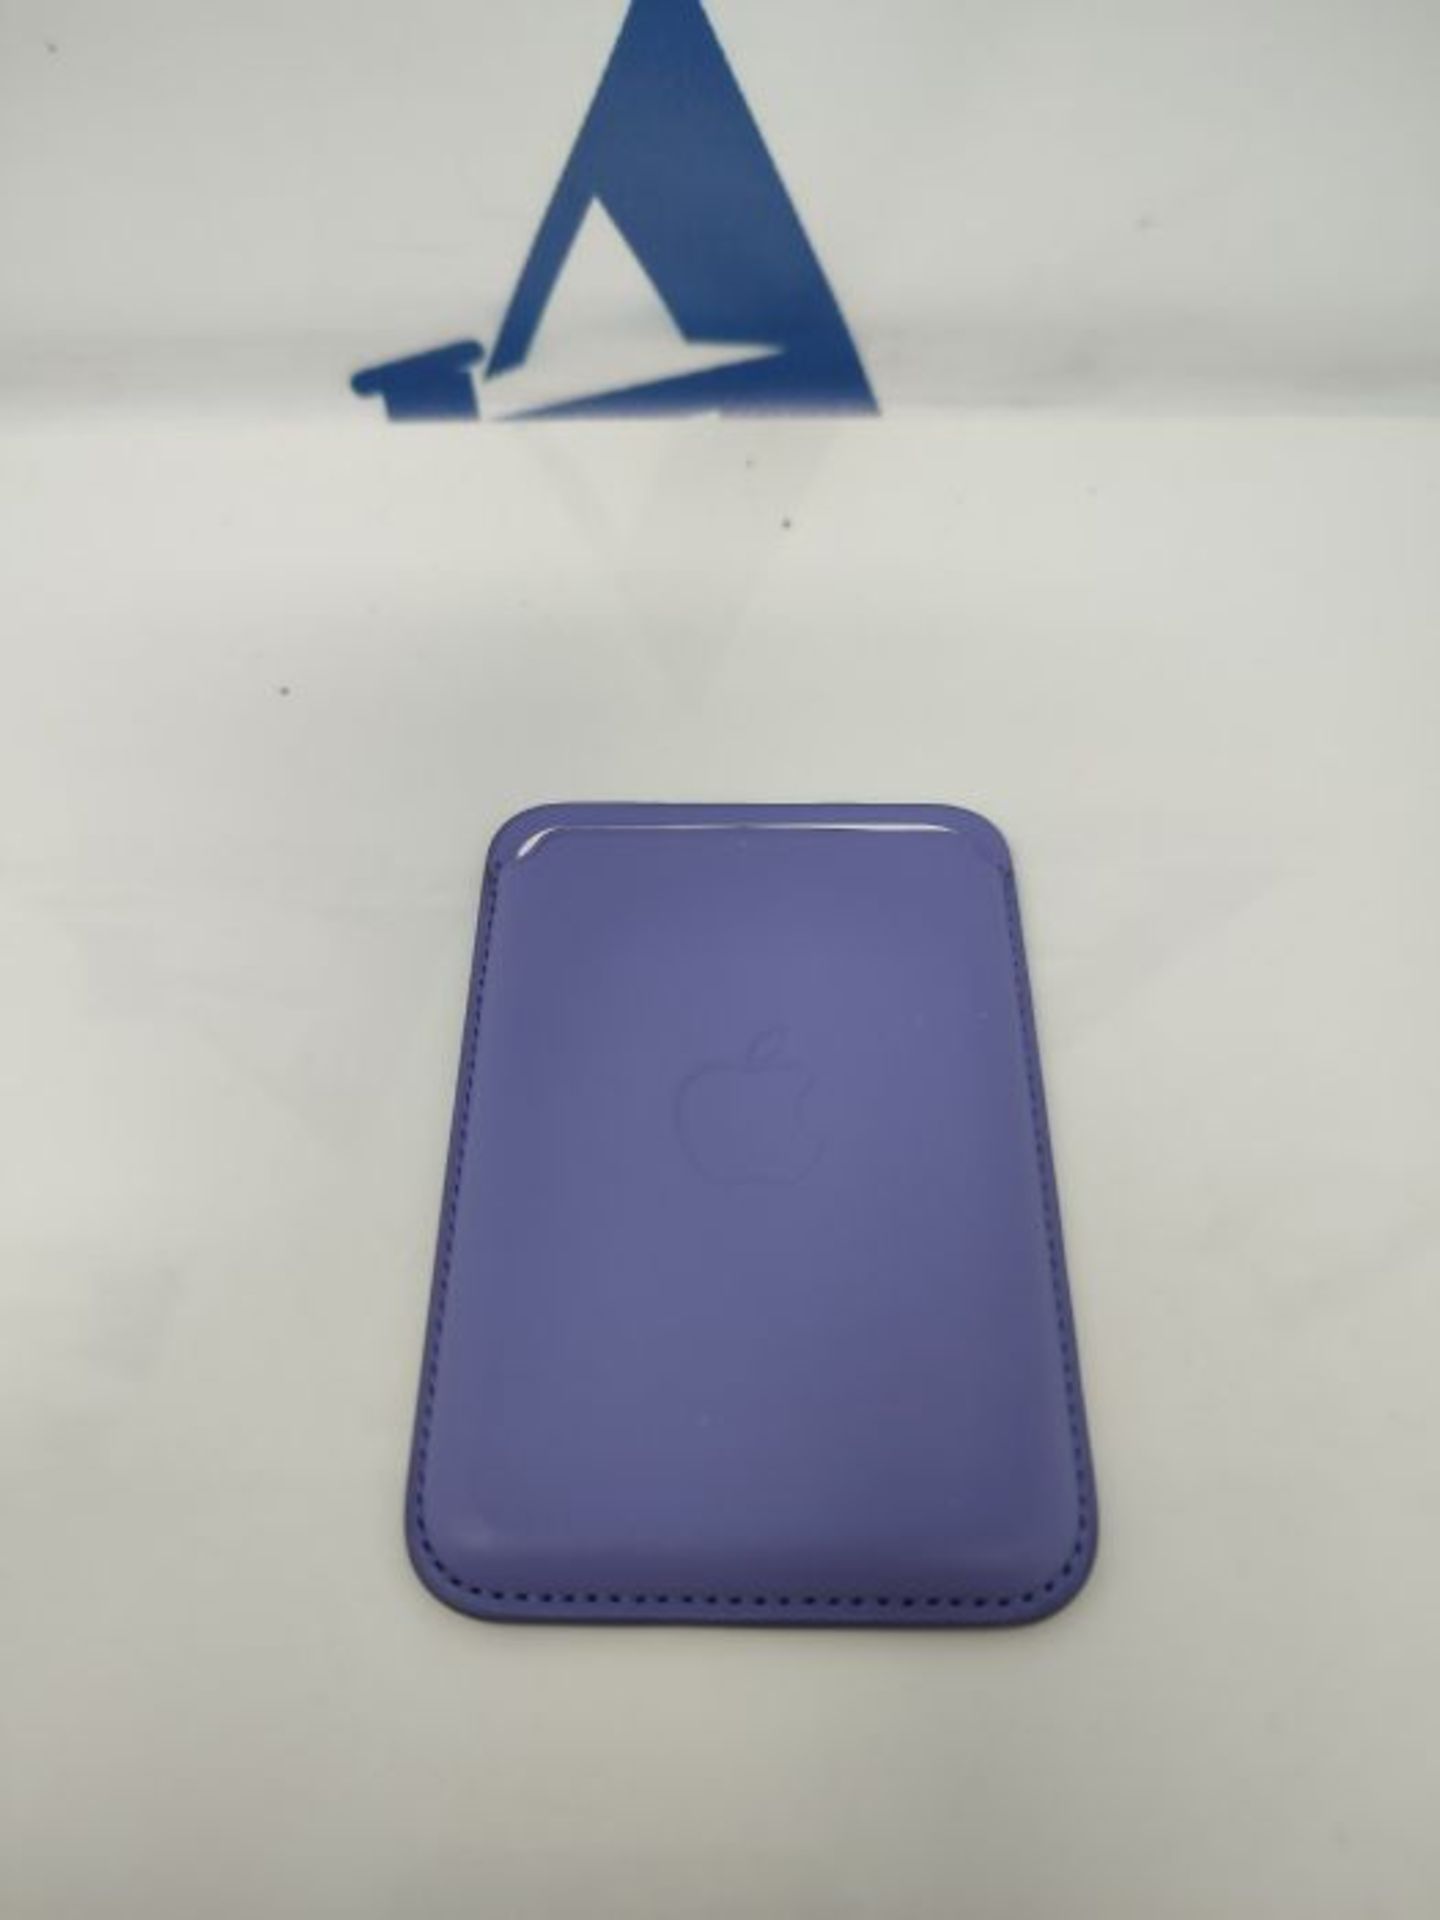 Apple Leather Wallet with MagSafe (for iPhone) - Wisteria - Image 3 of 3